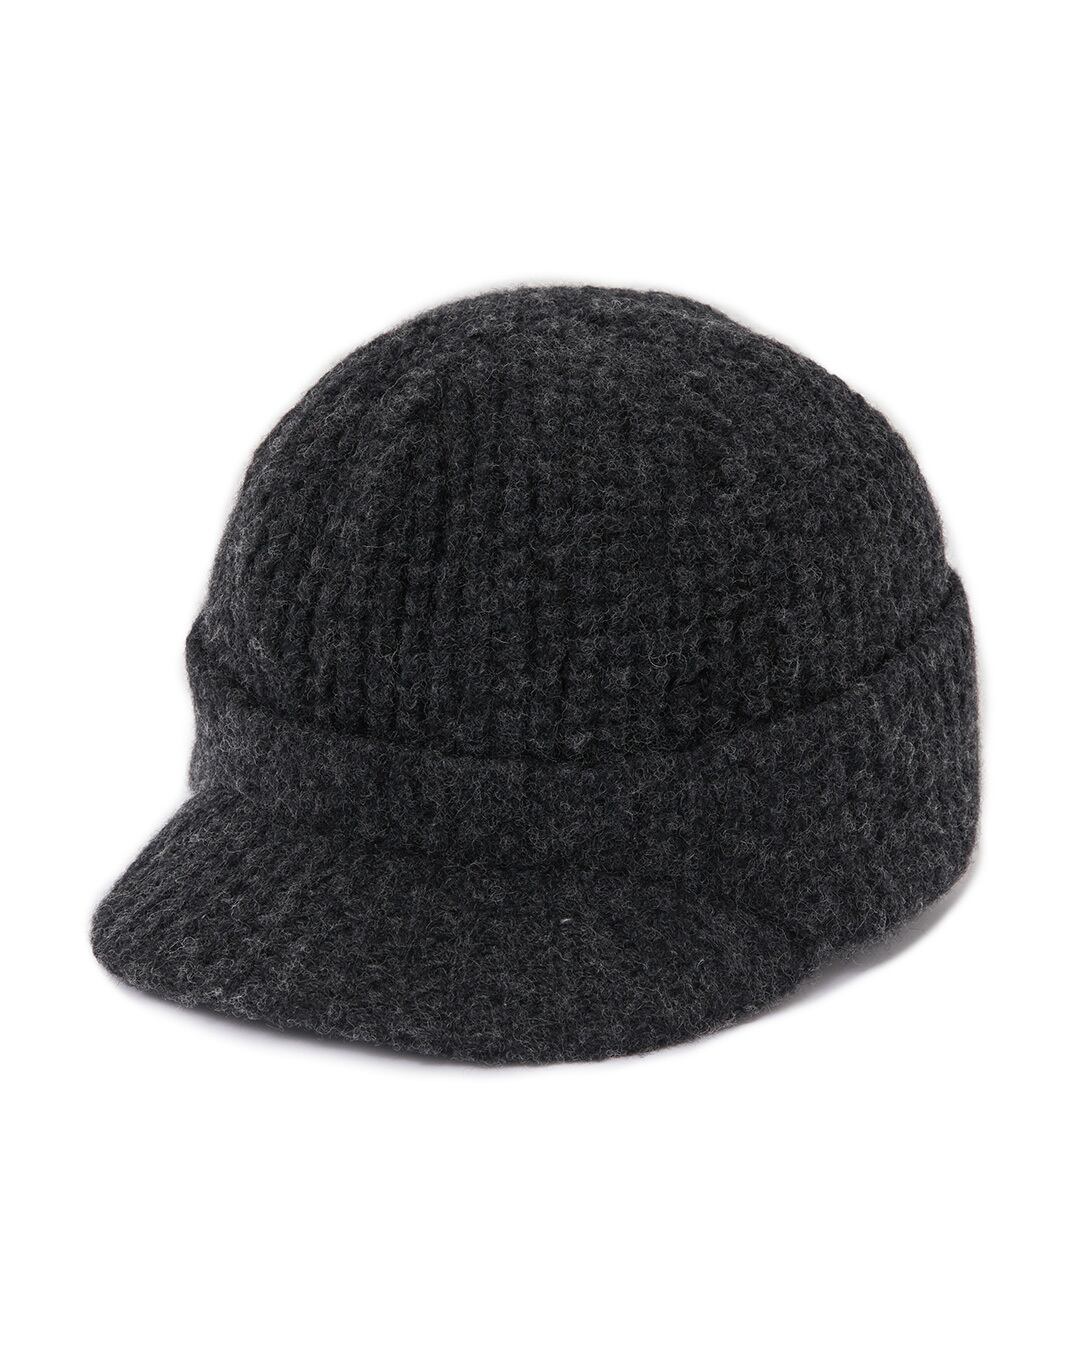 Just Right “Fulling Wool Jeep Cap” Charcoal